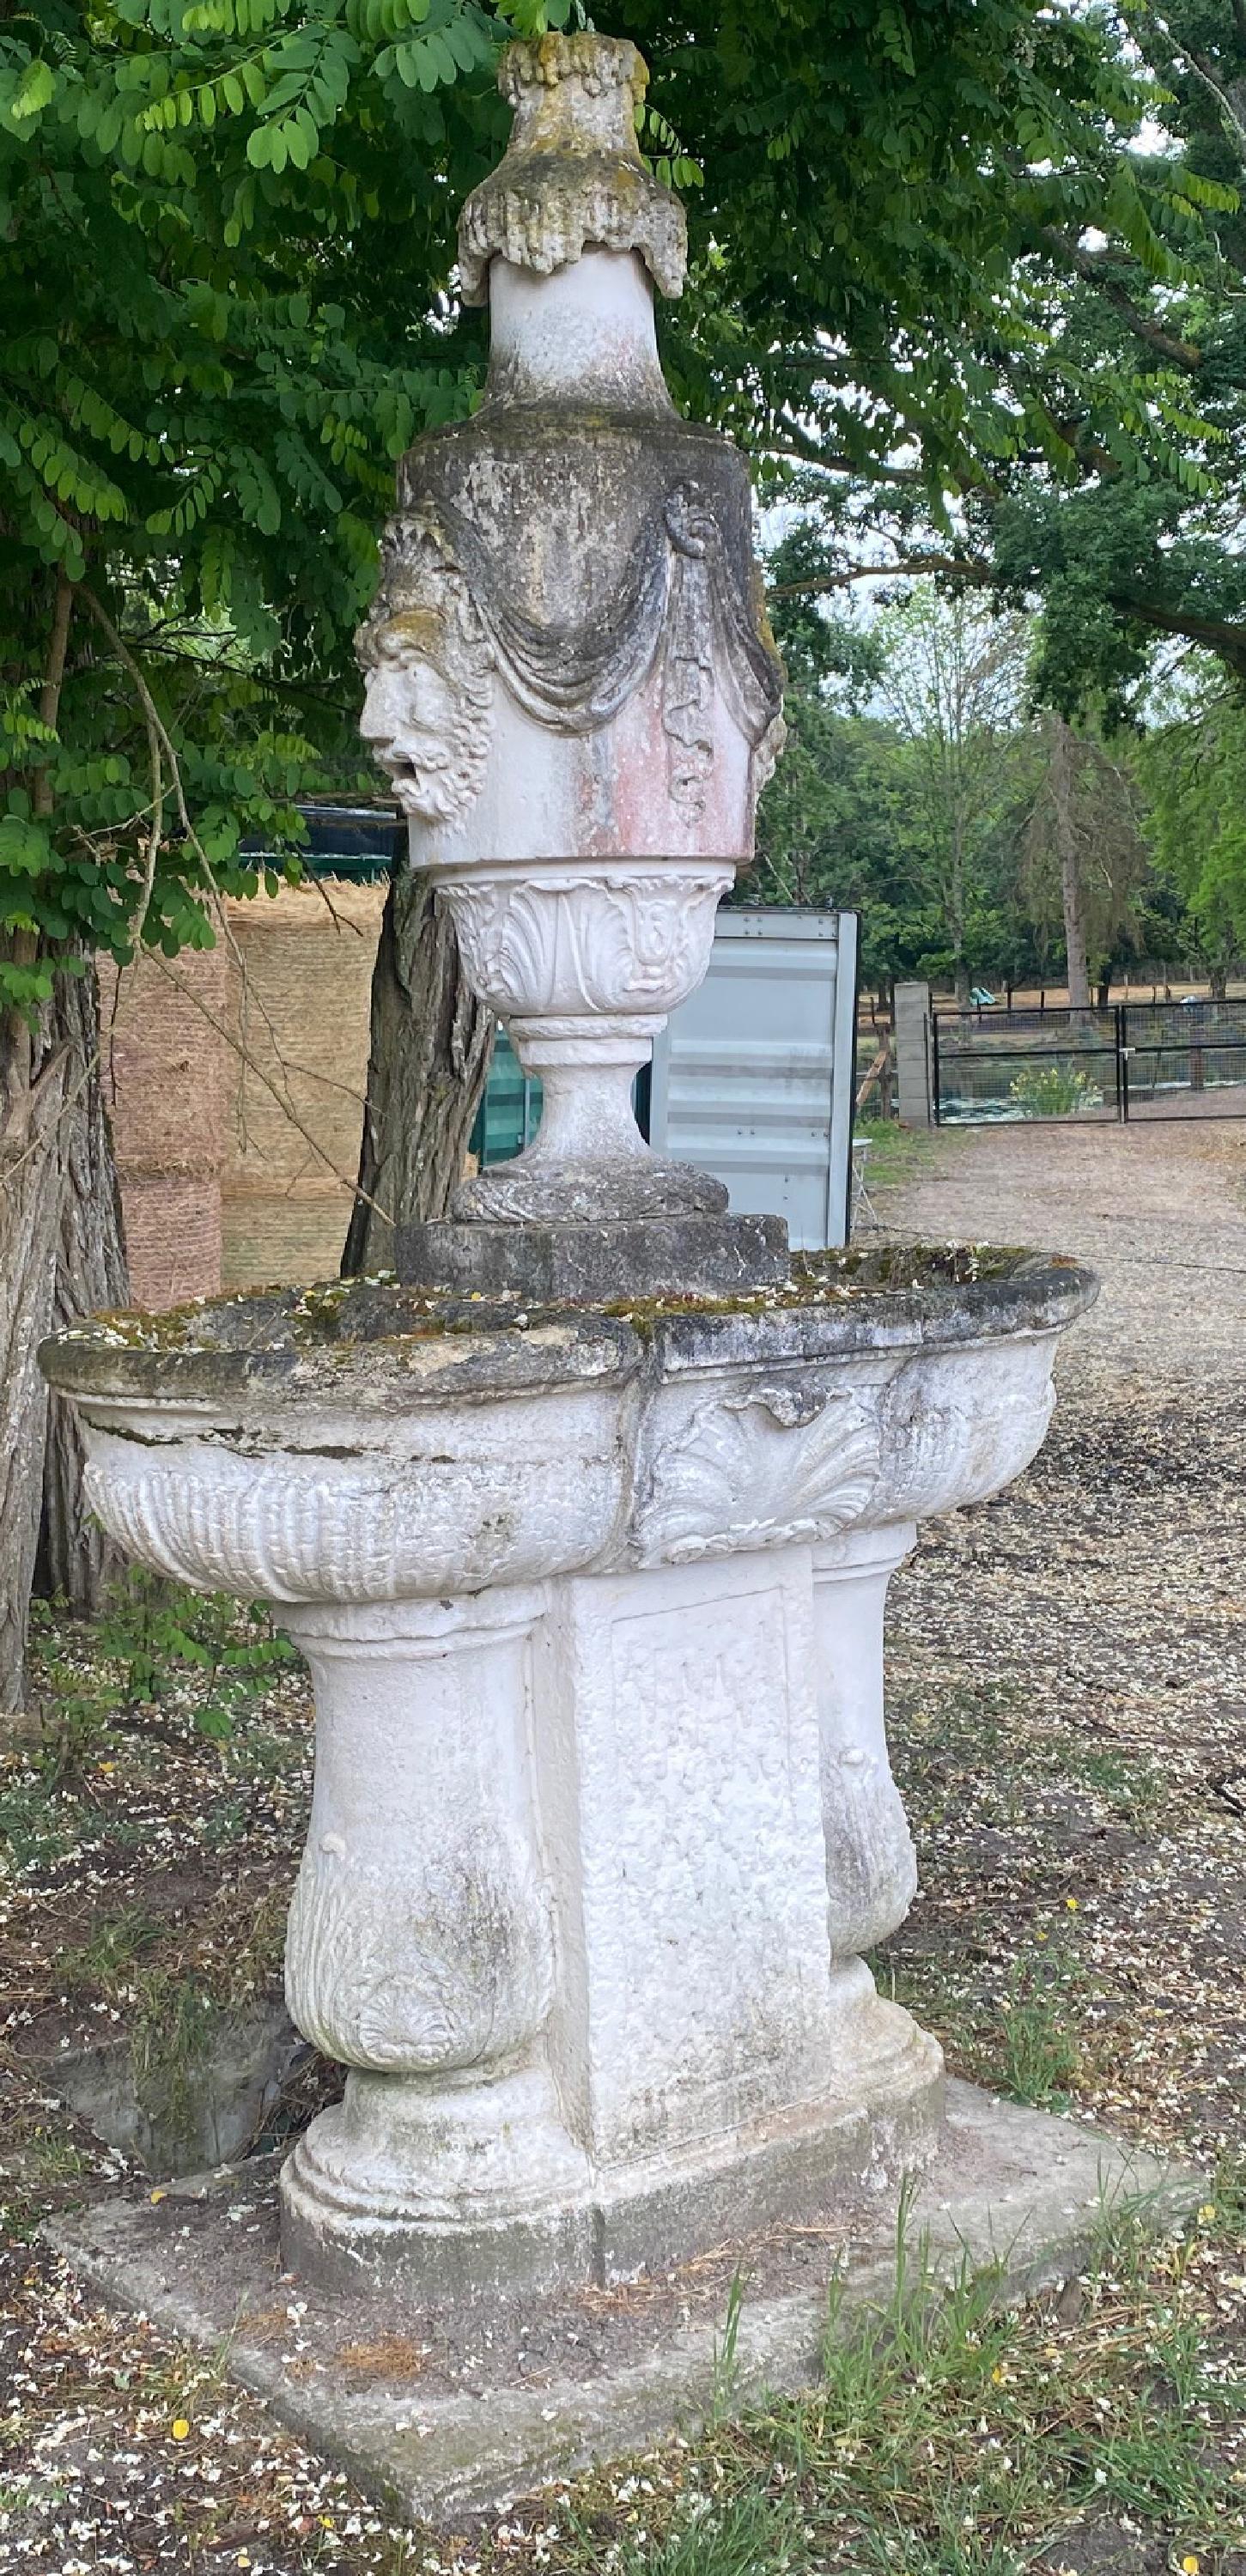 Regence style garden fountain with double basin in stone,
Very elegant construction, this sculpted fountain can be a central focus. It could be placed on a basin in a larger basin.